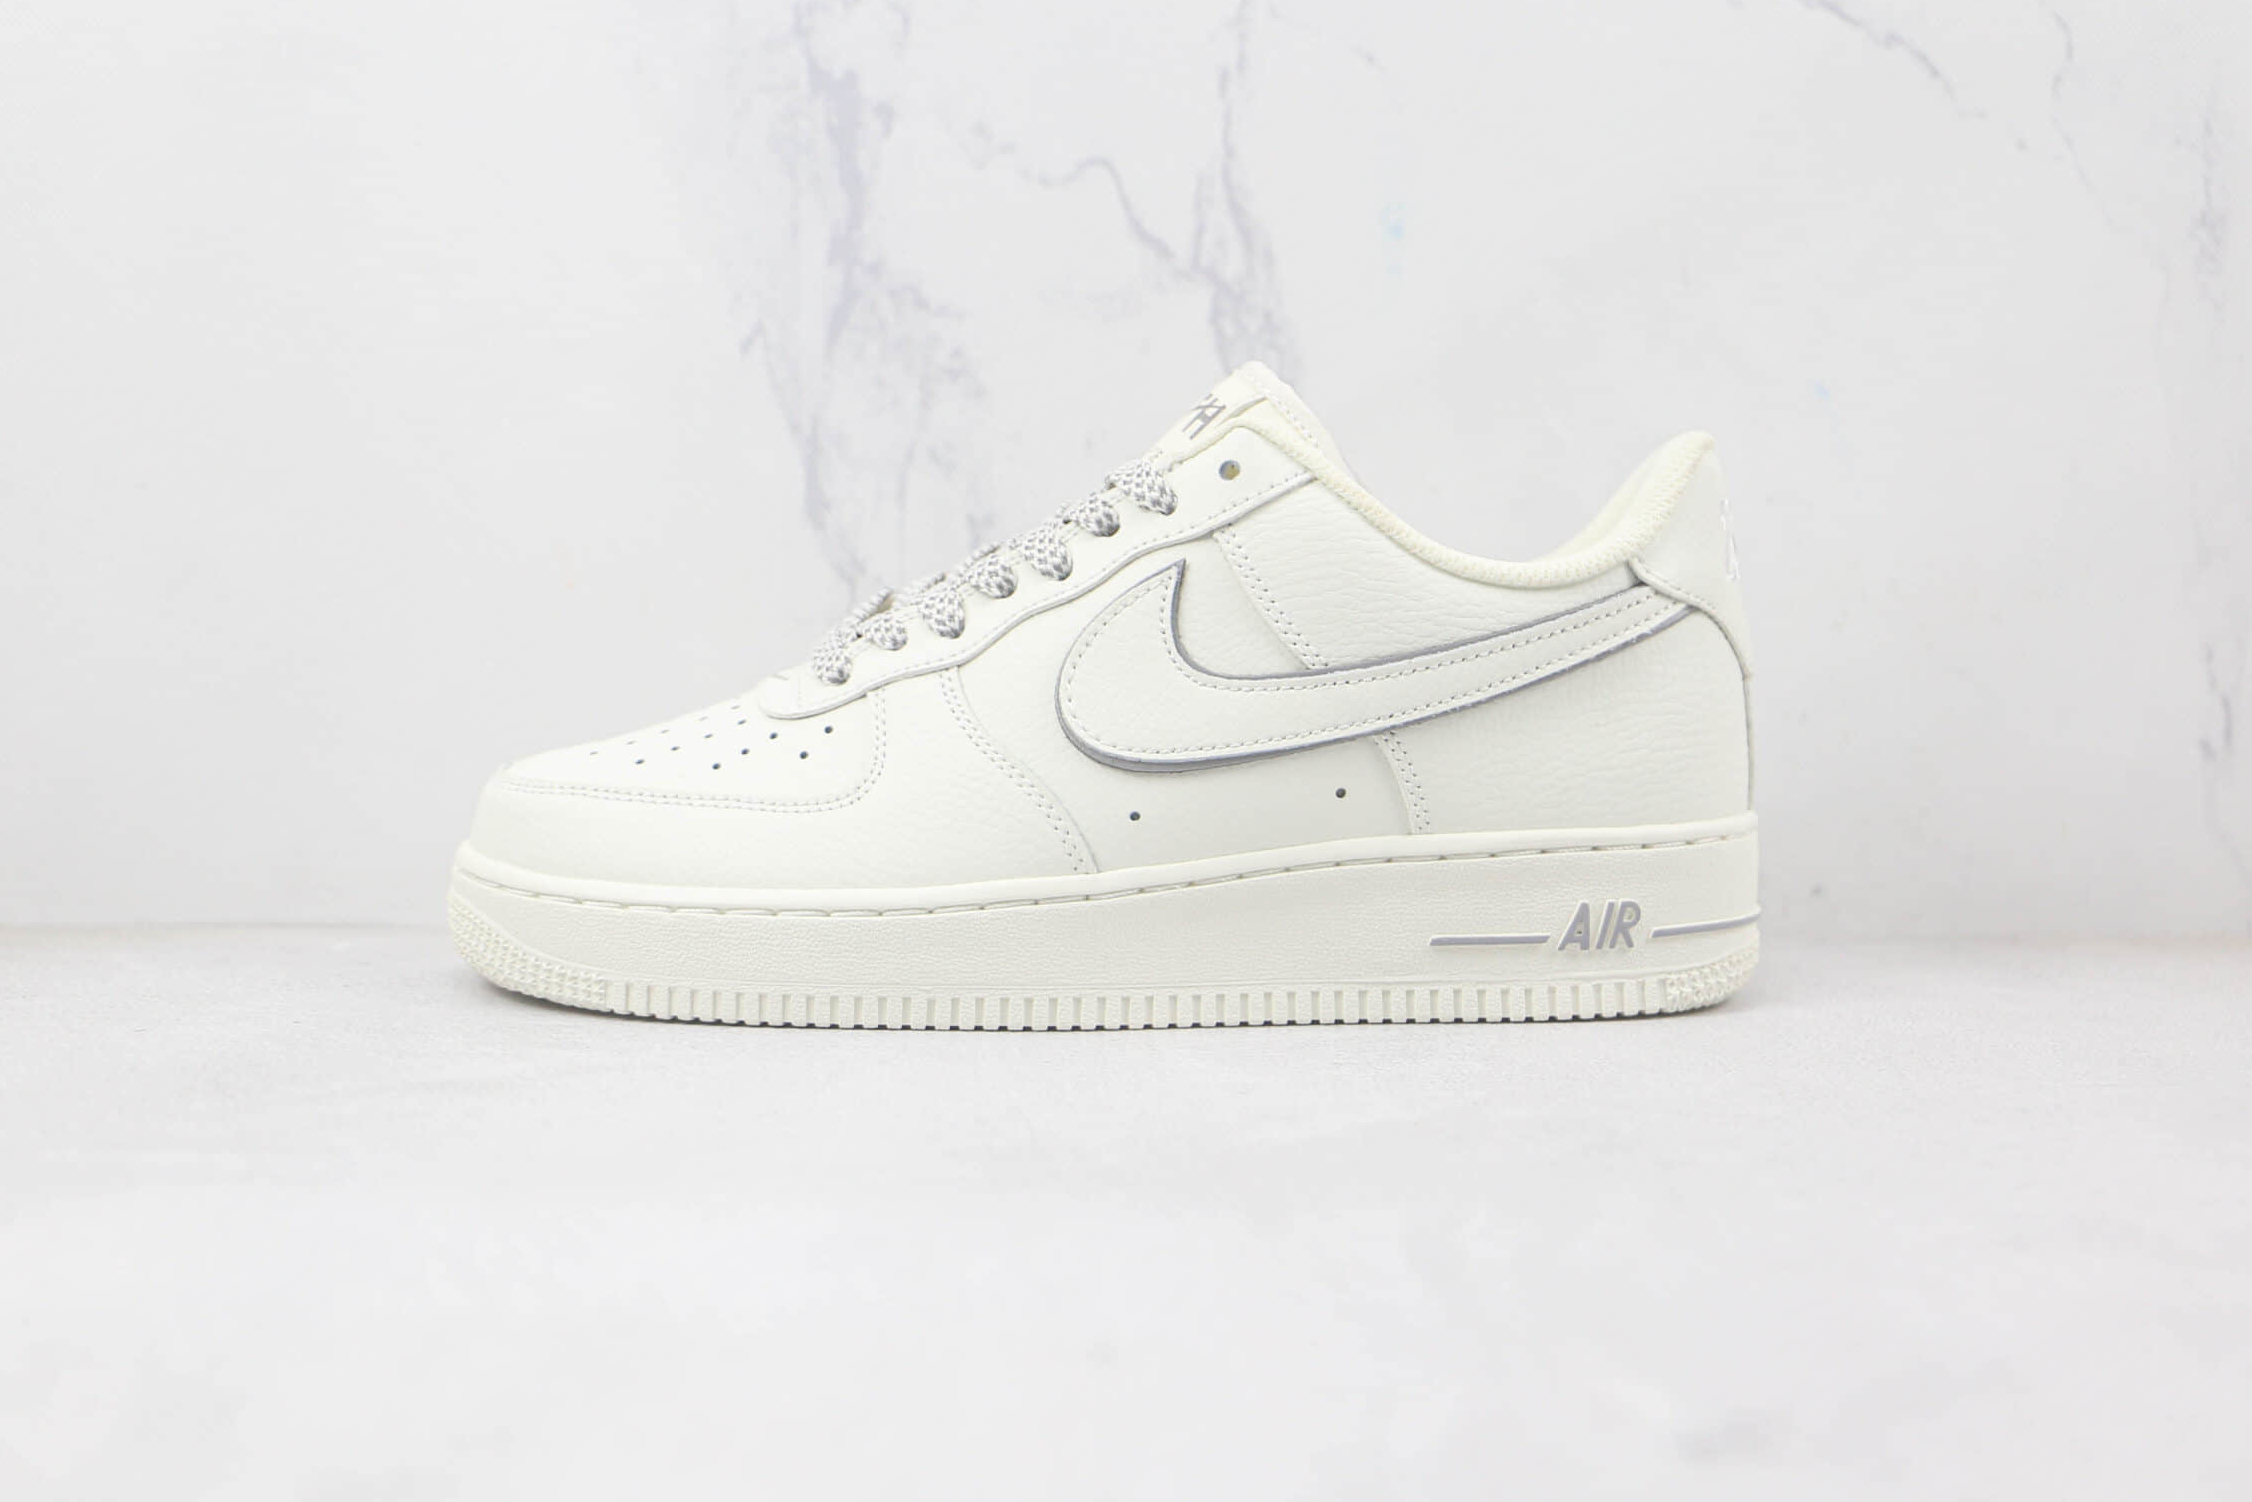 Kith x Nike Air Force 1 07 Low Rice White Metallic Sliver NY2022-017 - Premium Collaboration Sneakers